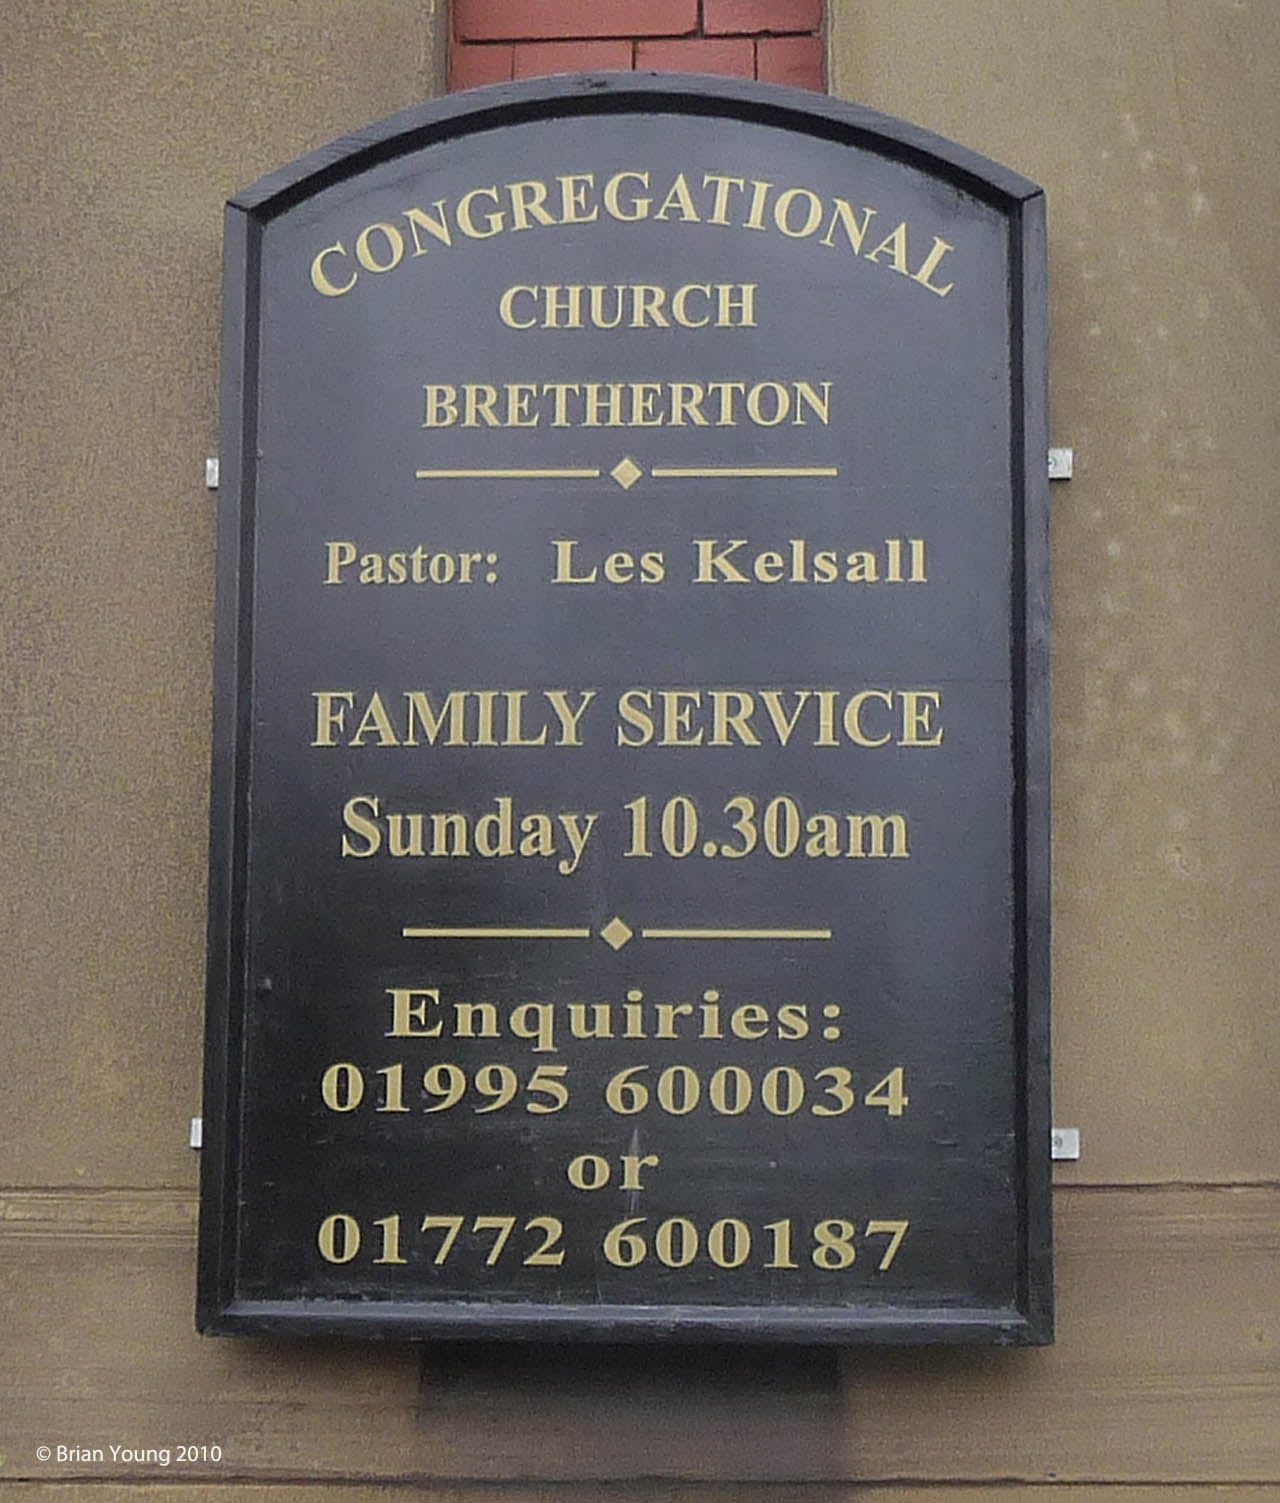 The Church Sign, now Congregational, Bretherton, Photograph supplied by and  of Brian Young